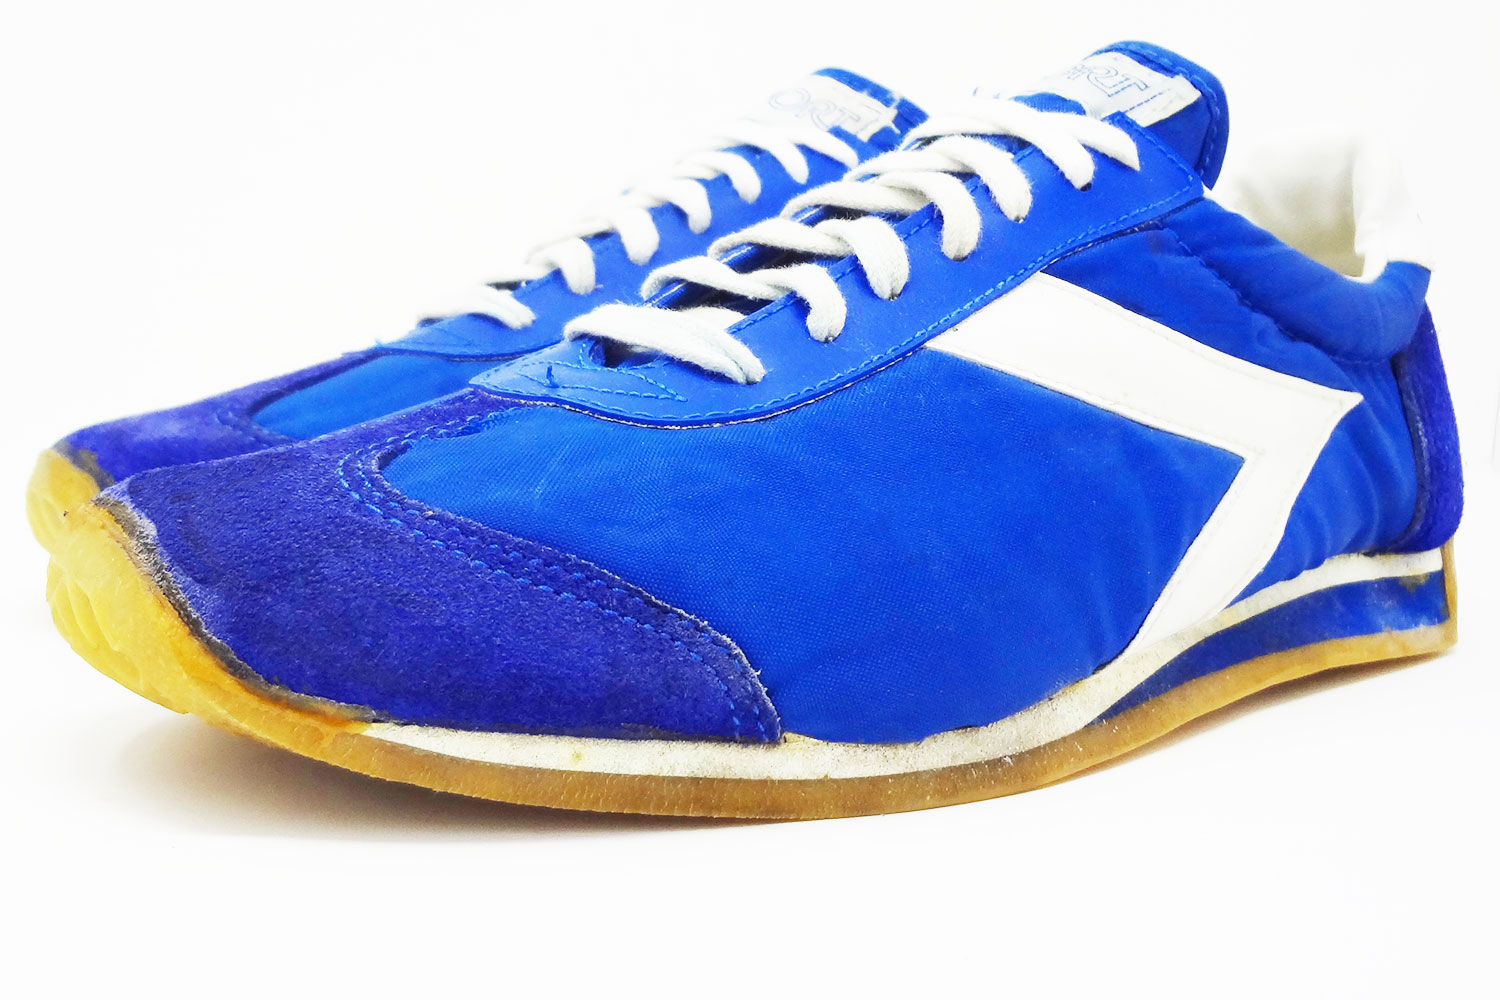 The Deffest®. A vintage and retro sneaker blog. — 